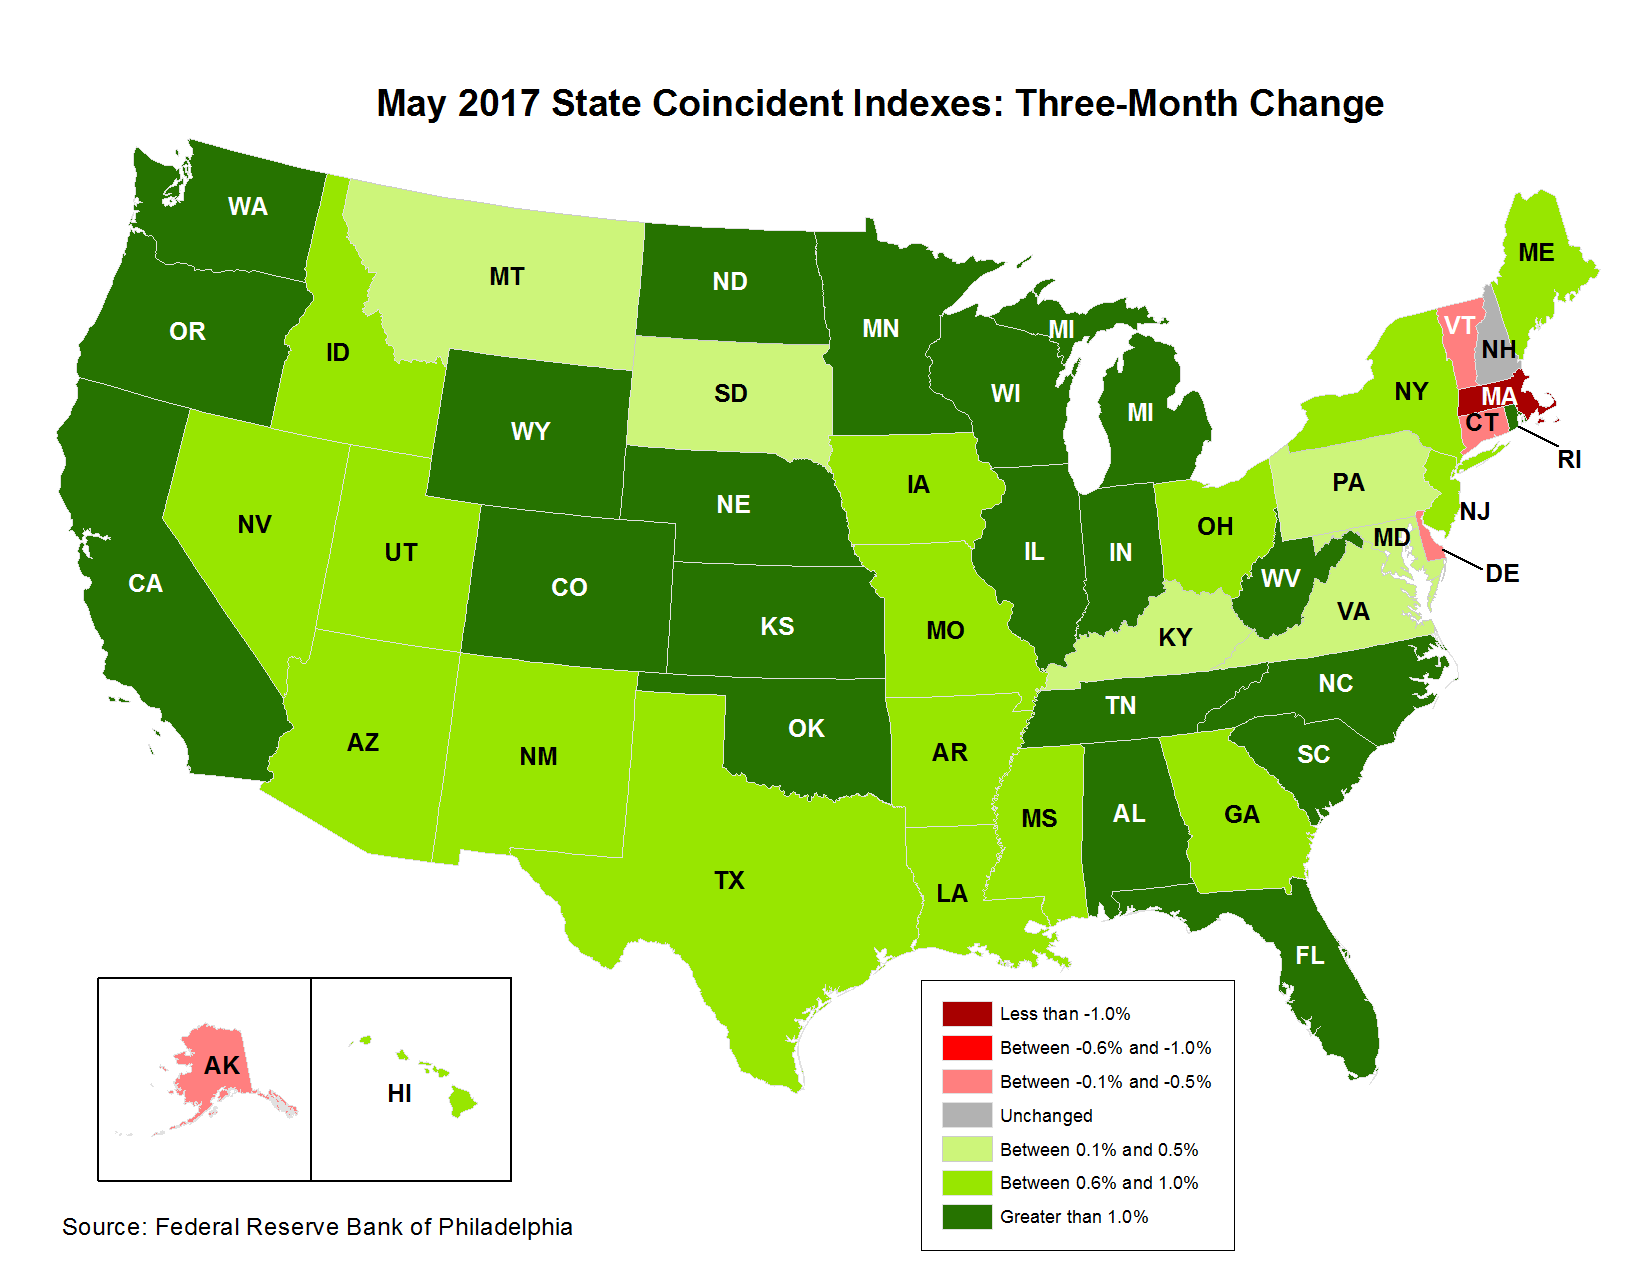 Map of the U.S. showing the State Coincident Indexes Three-Month Change in May 2017